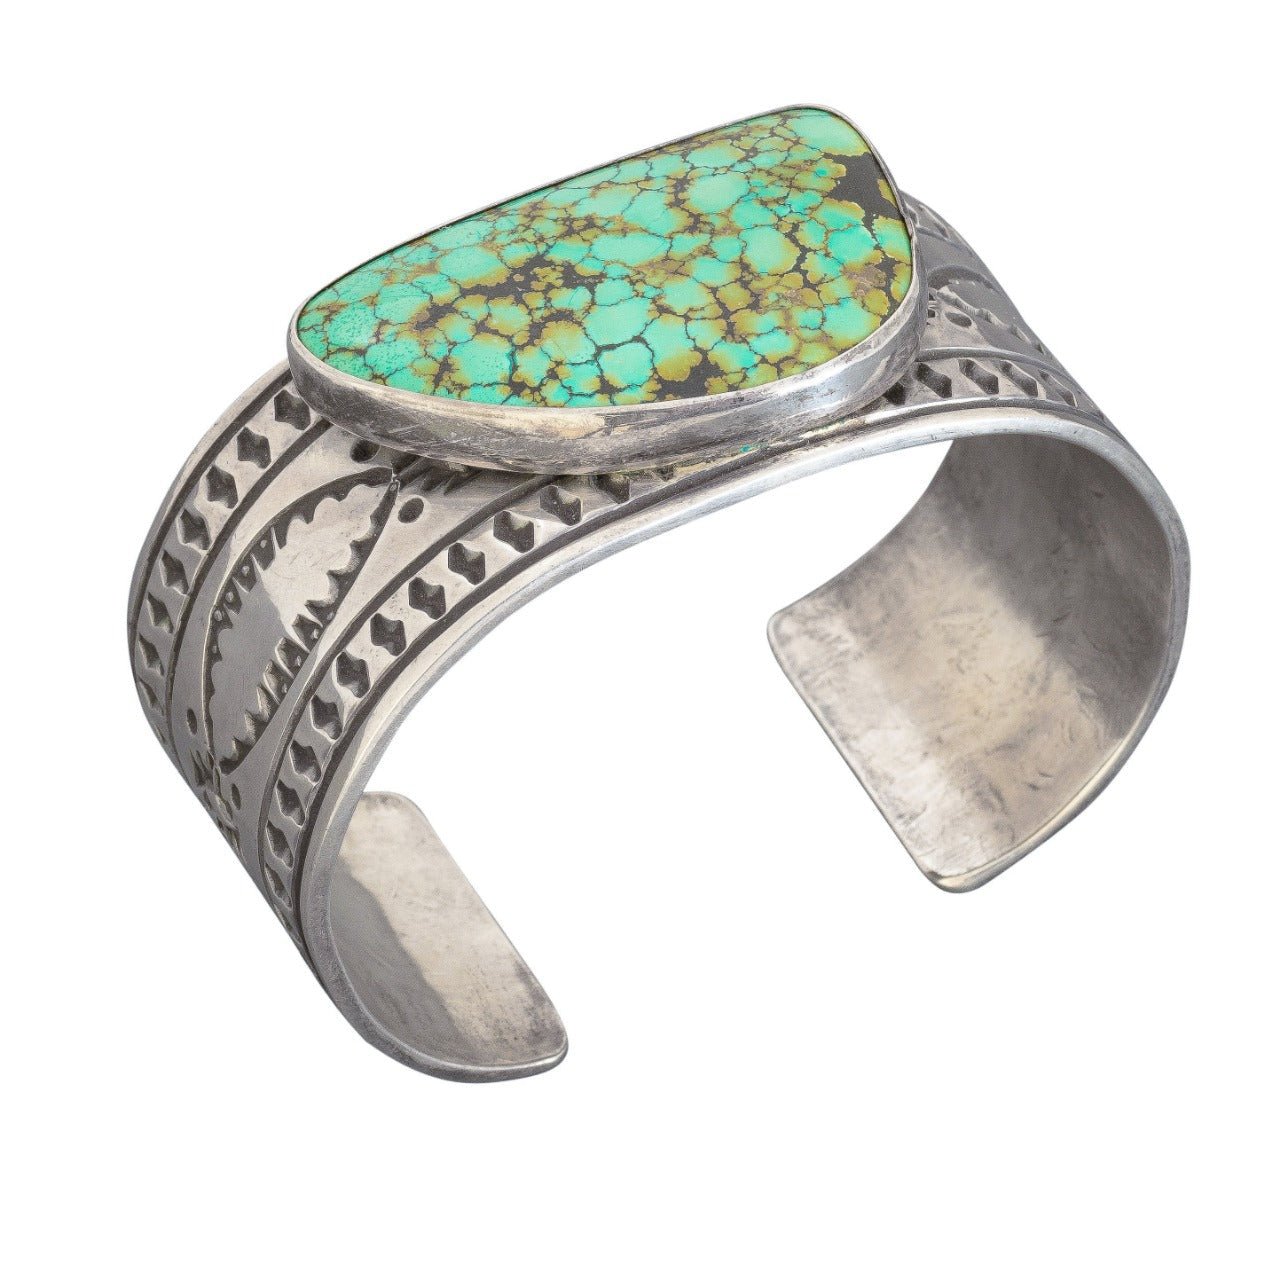 Large Vintage Navajo Turquoise Cuff By Ben Yellowhorse - Turquoise & Tufa